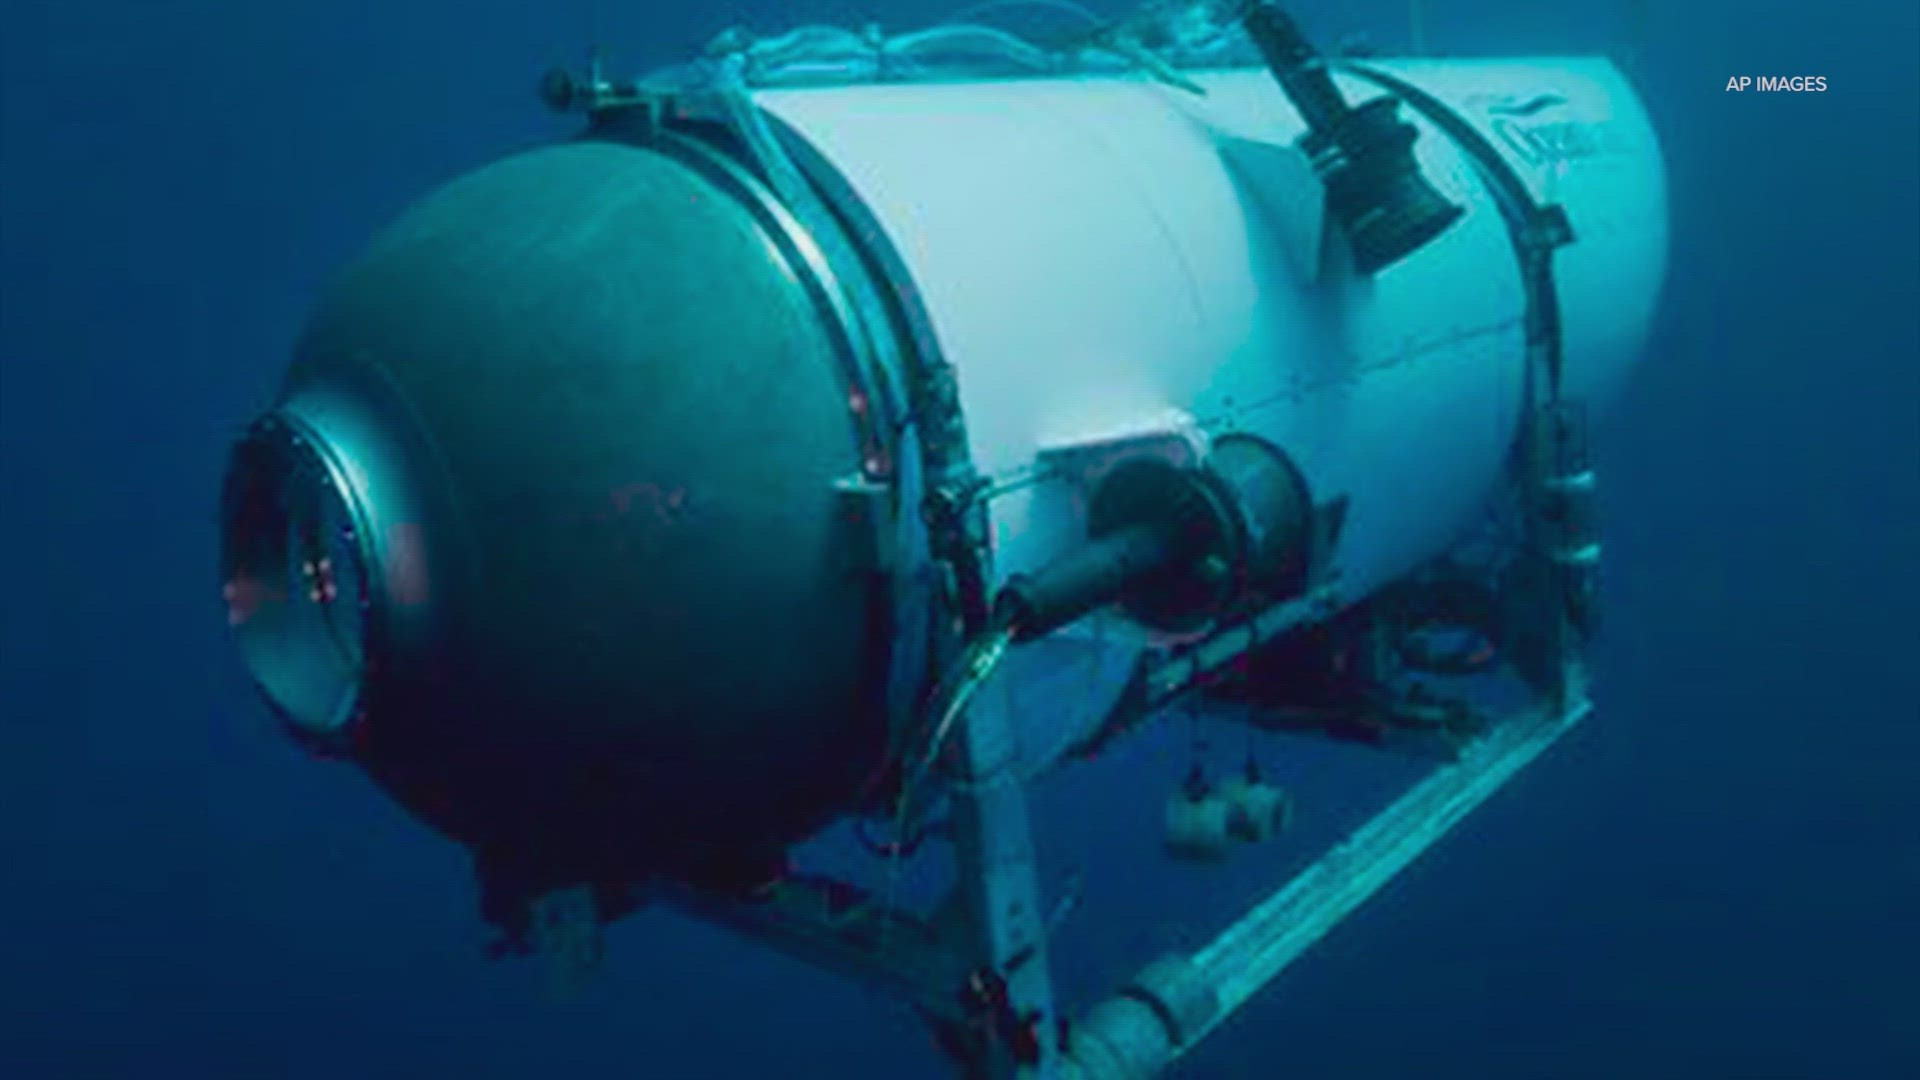 The submersible had a 96-hour oxygen supply when it launched Sunday, meaning every passing minute puts the crew at greater risk.